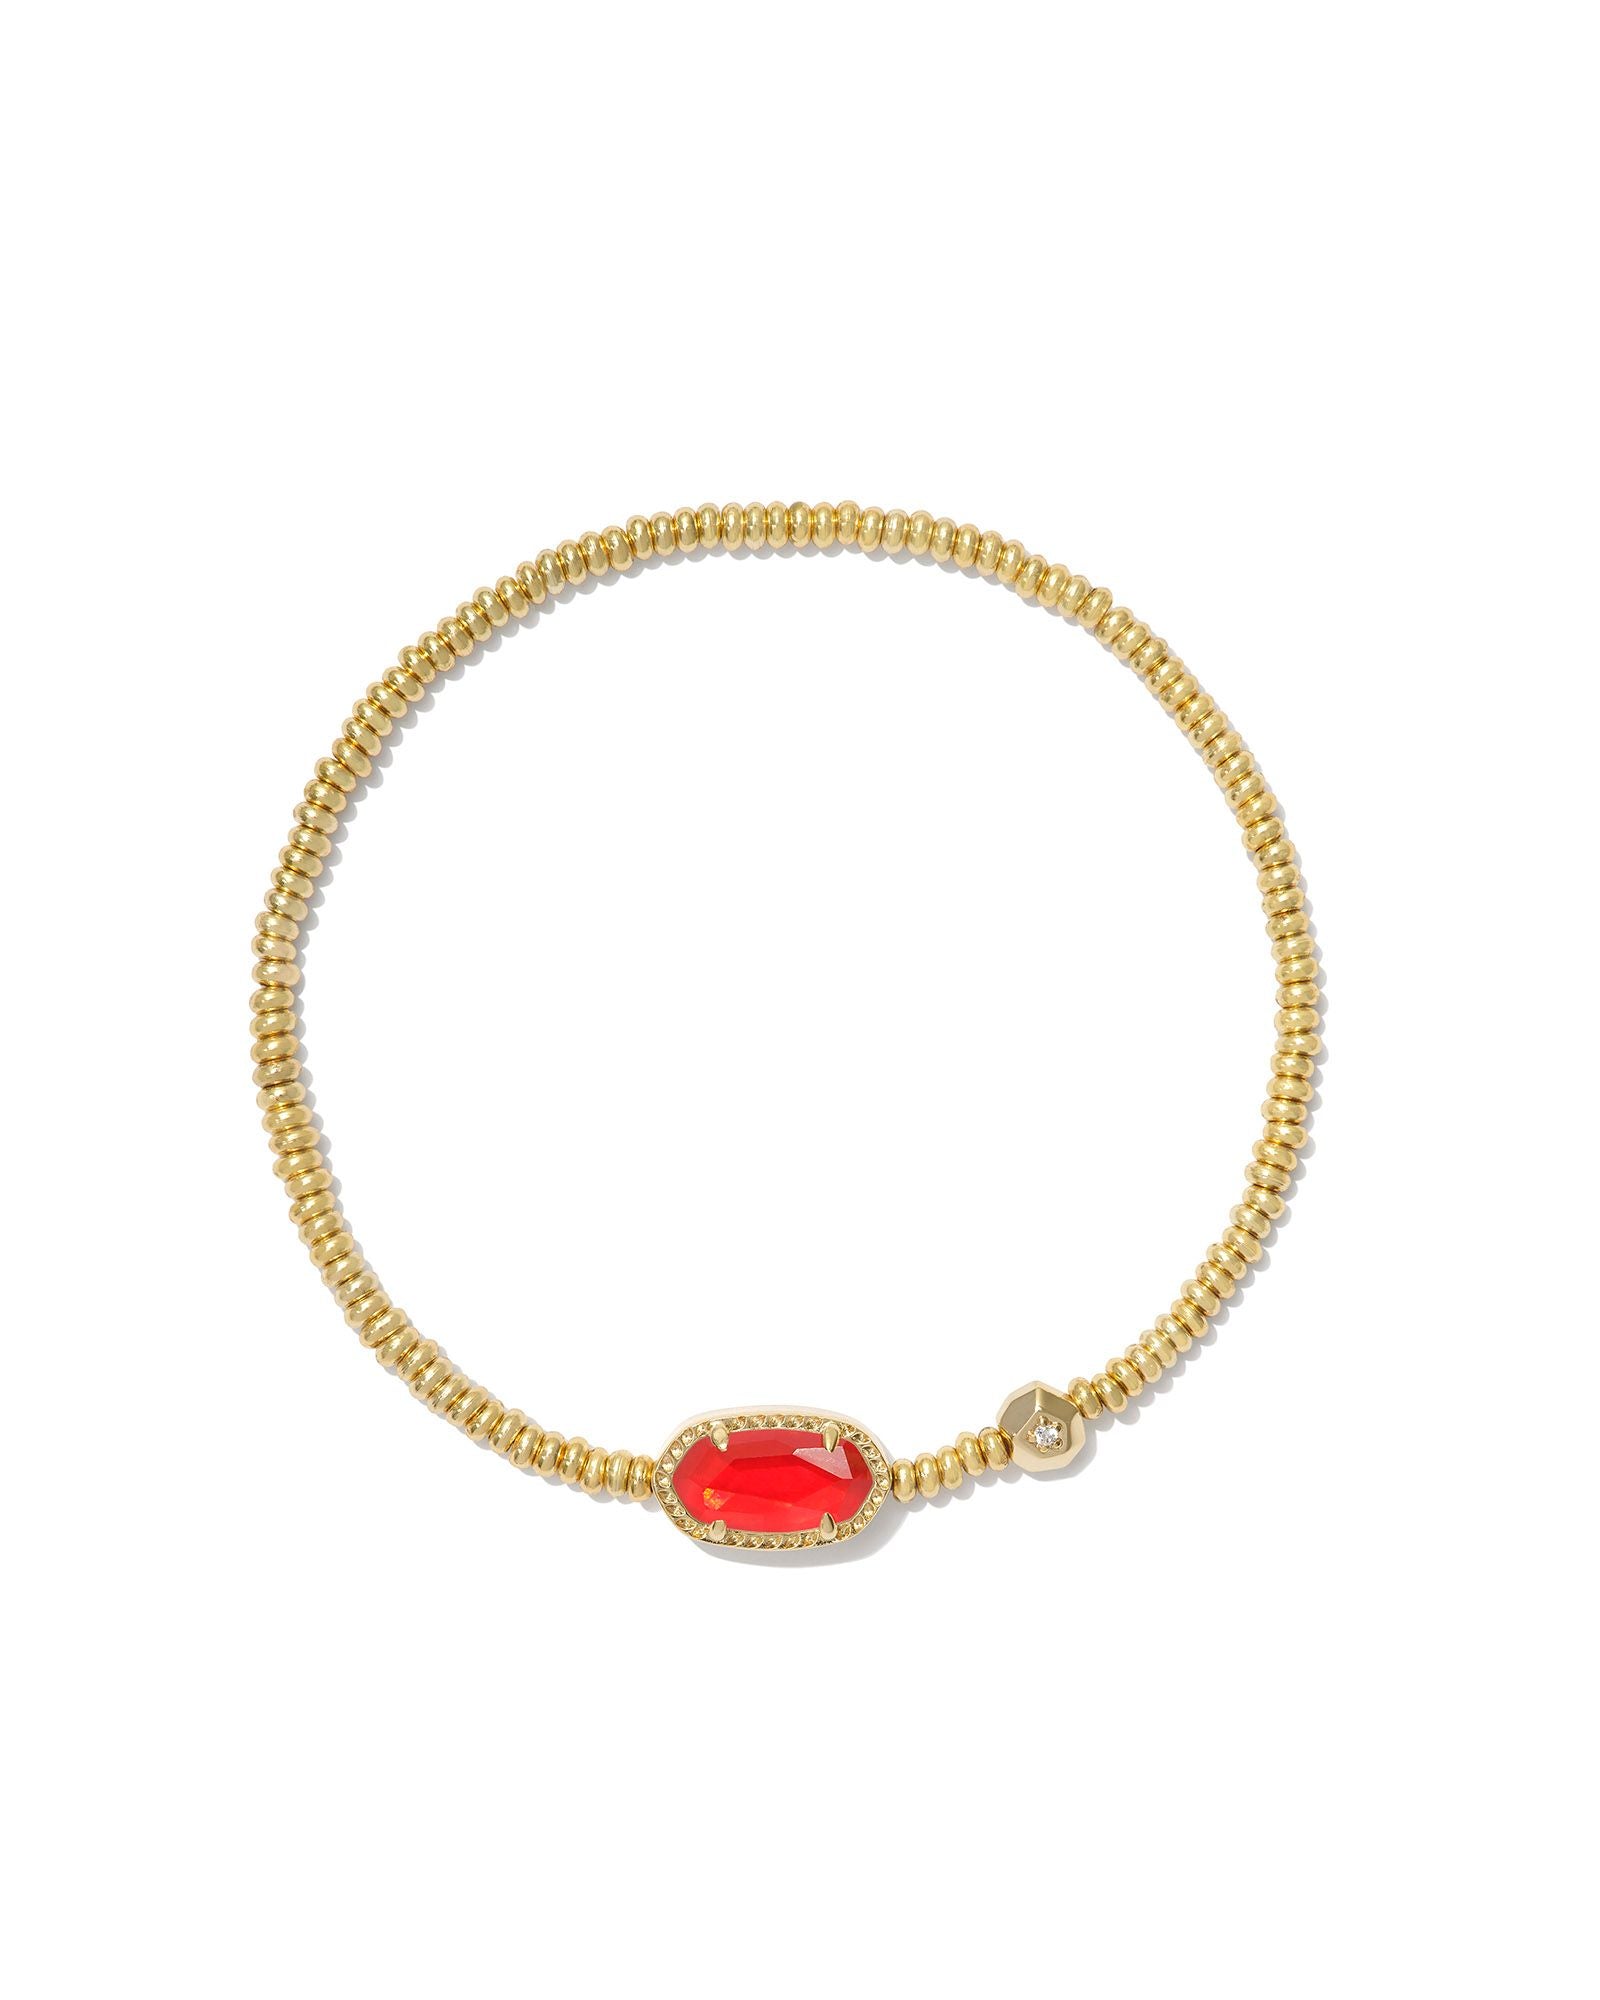 Grayson Stretch Bracelet in Gold Red Illusion